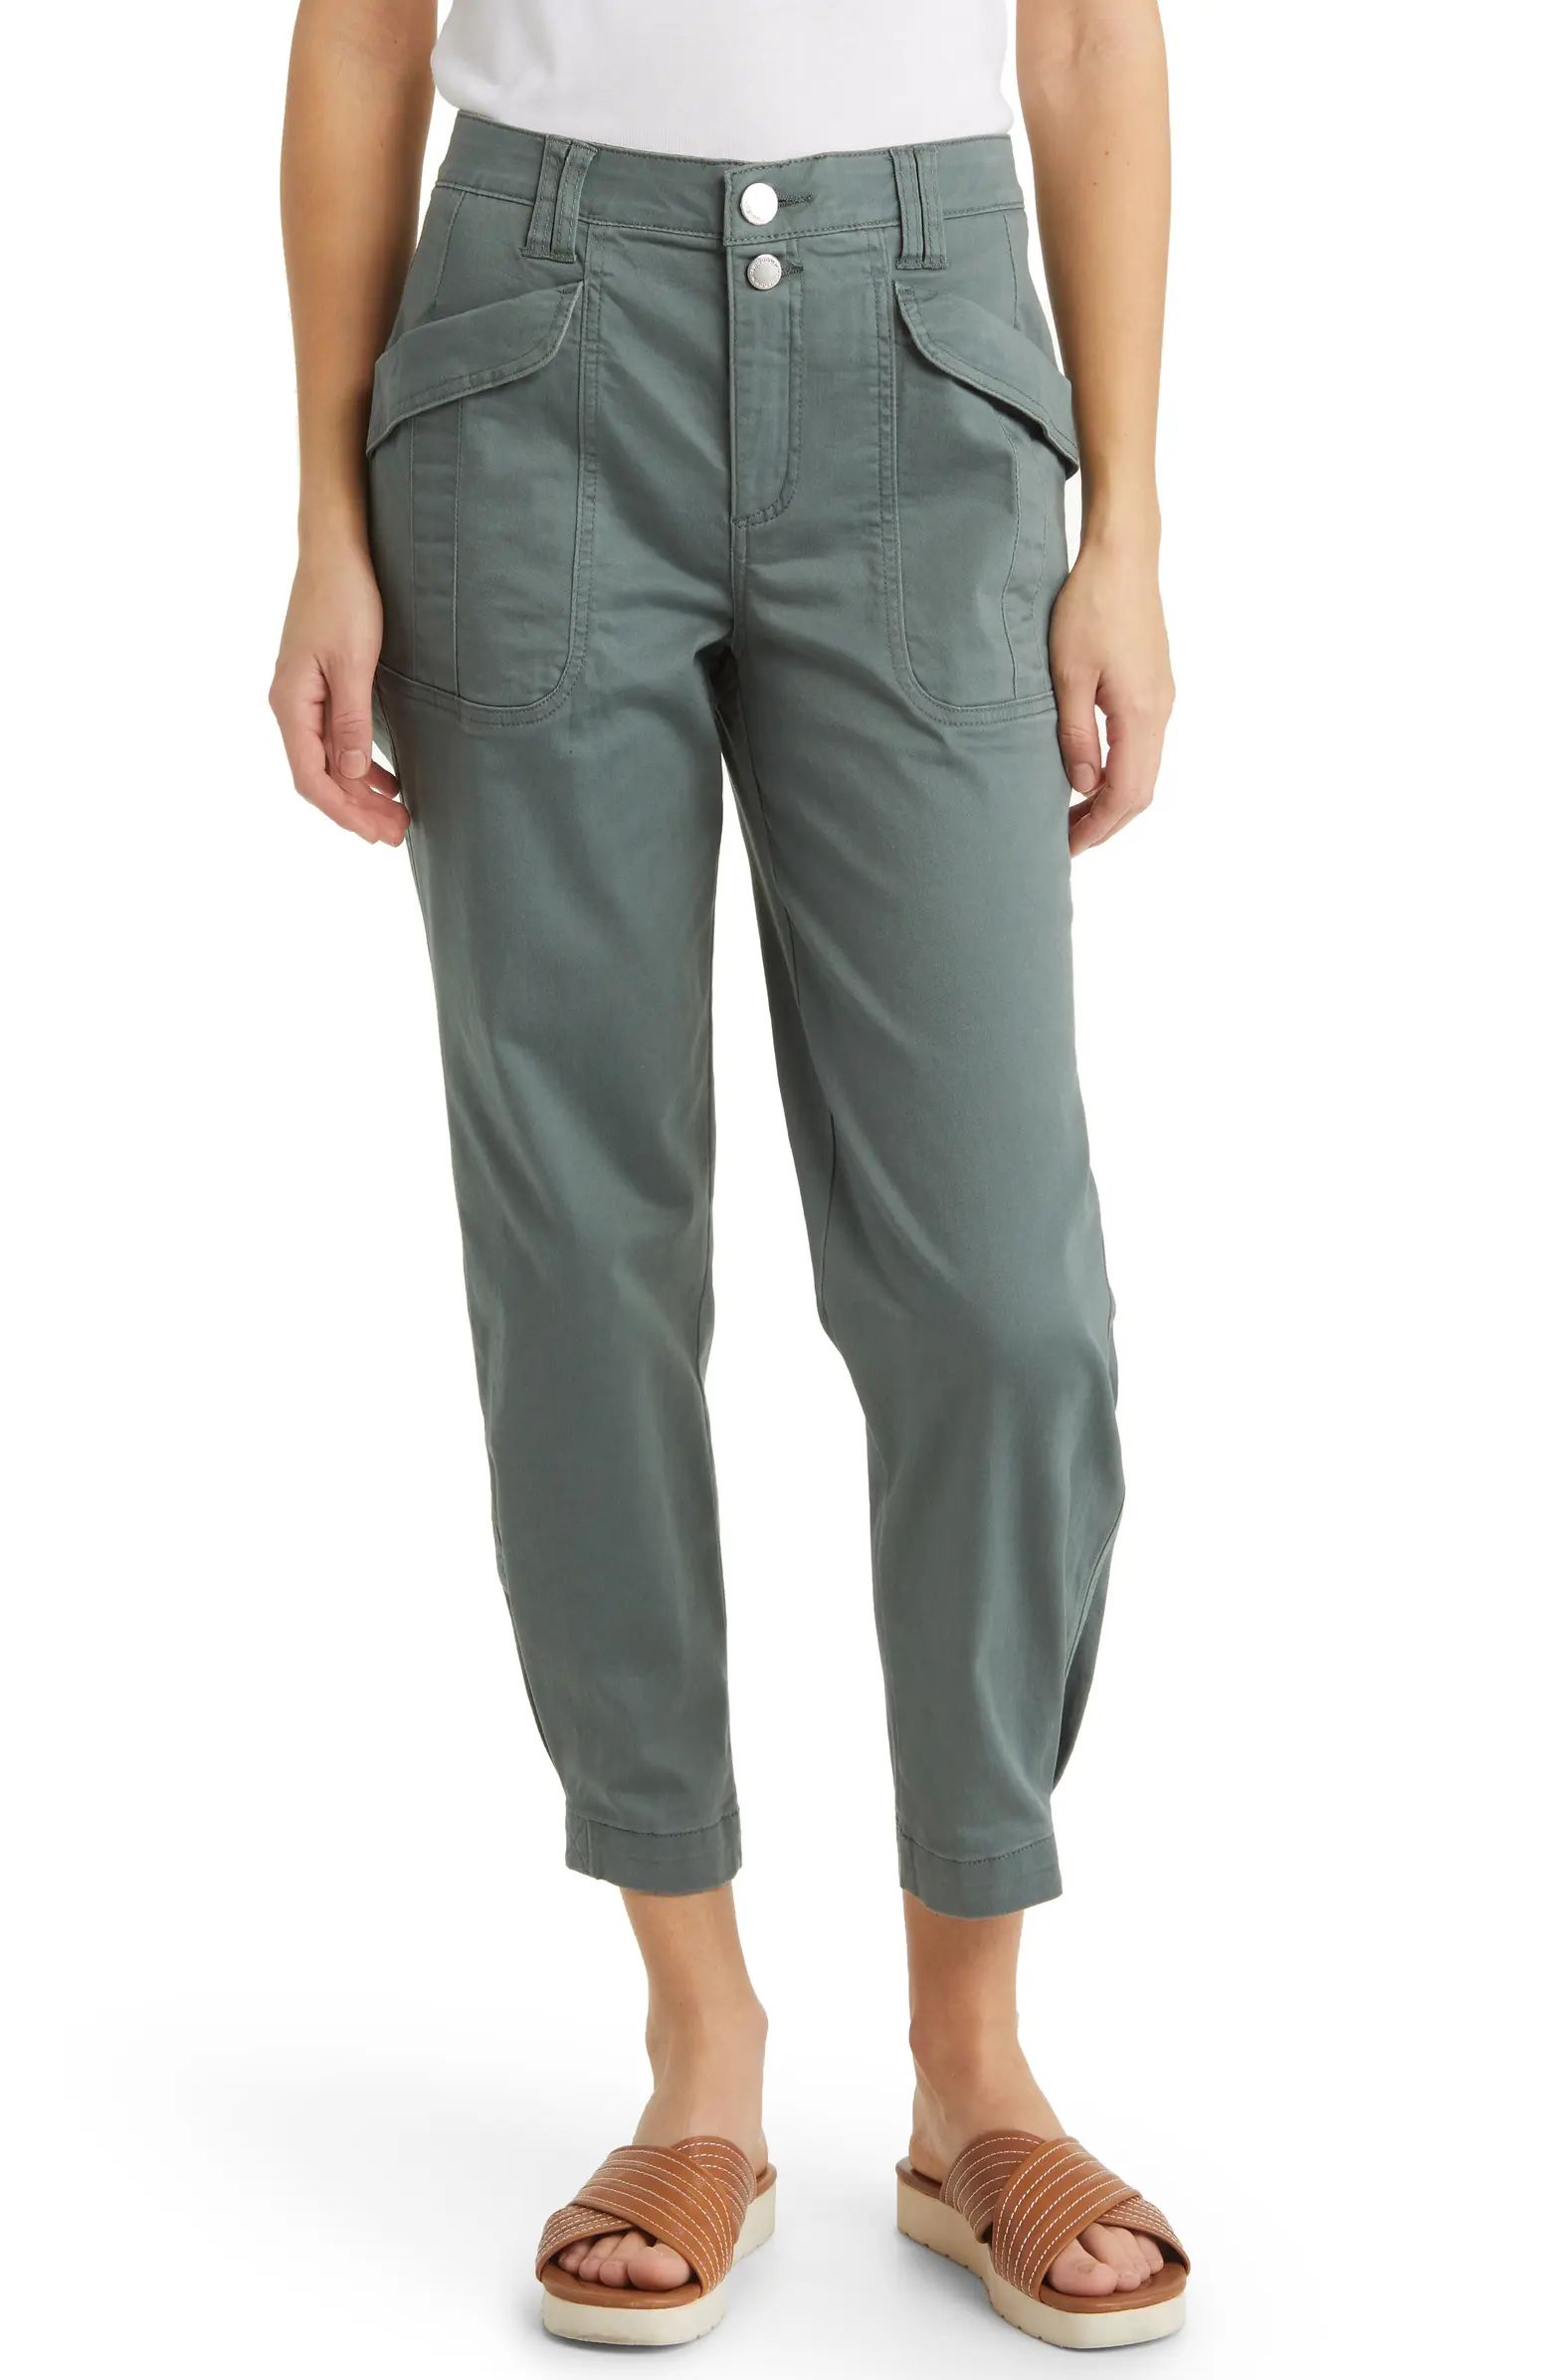 Wit & Wisdom 'Ab'Solution Skyrise Double Button Pants | Nordstrom | Nordstrom